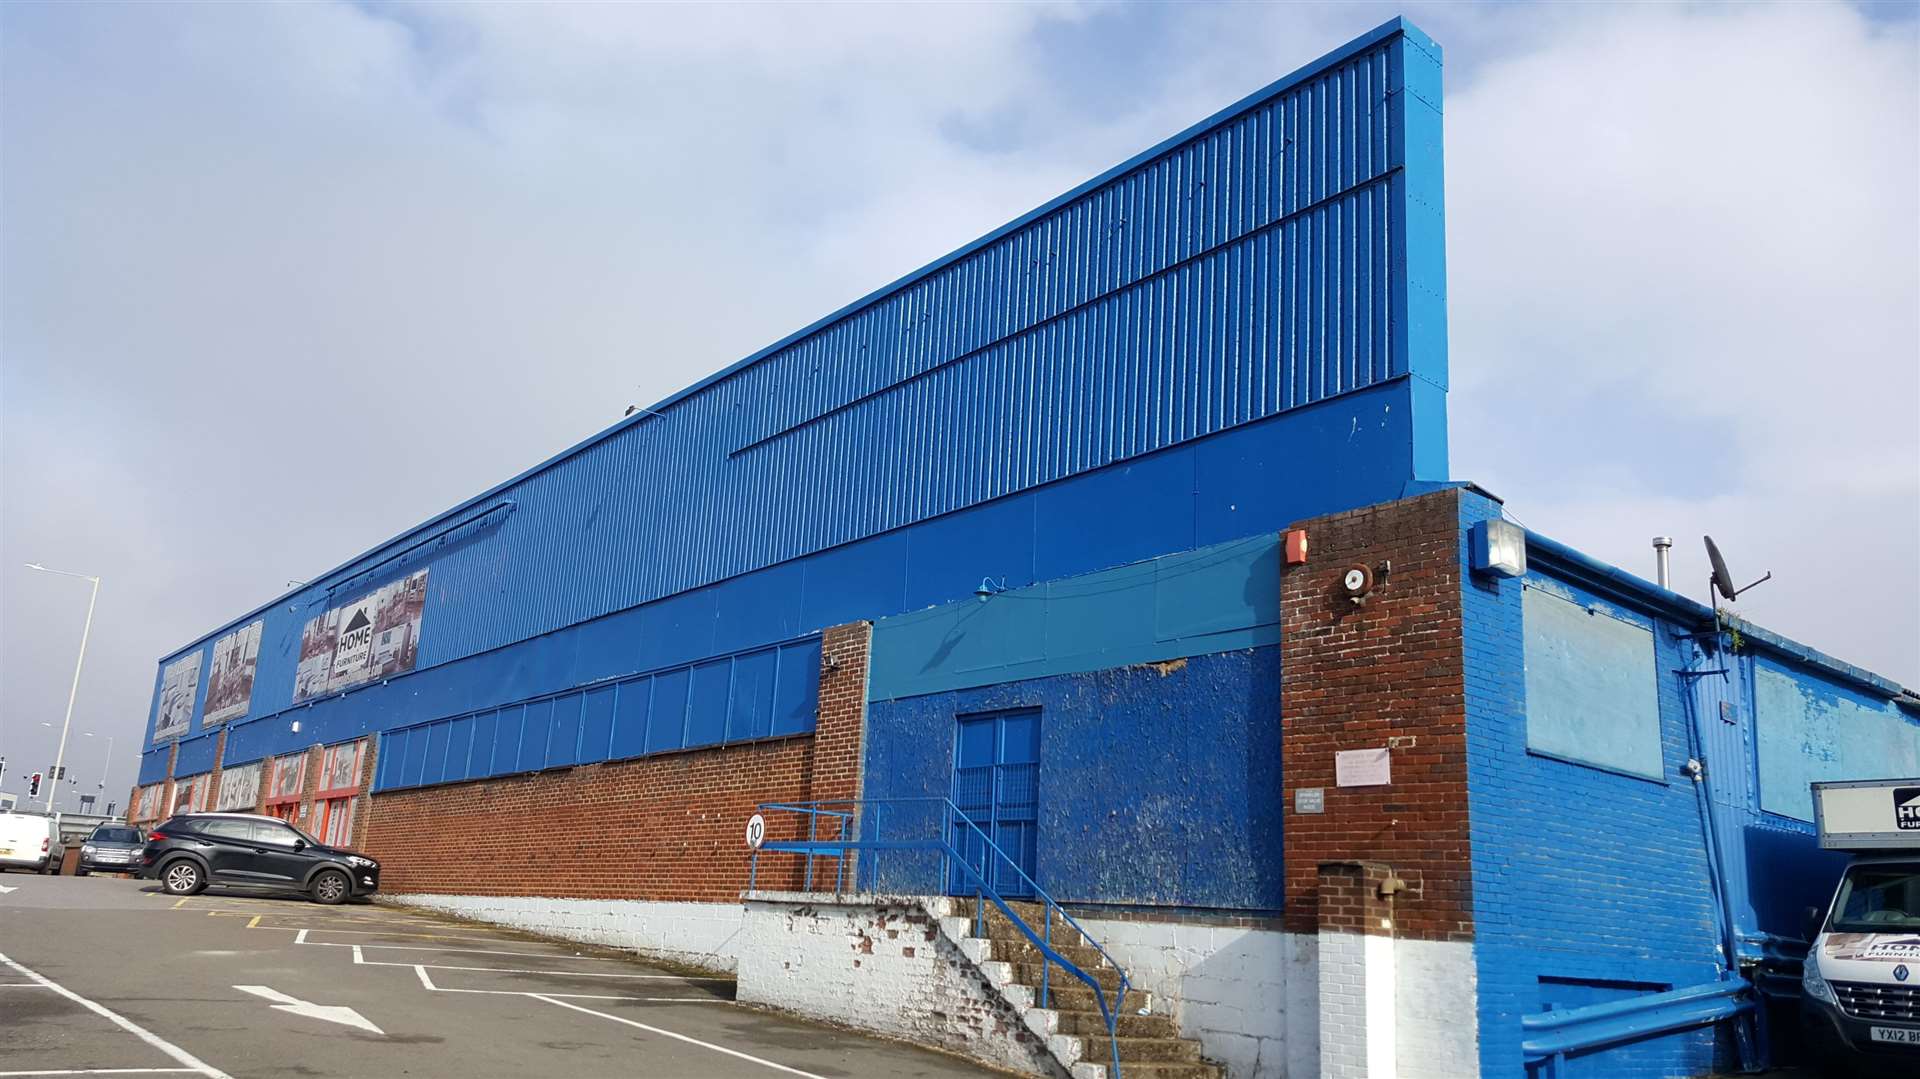 HomePlus was previously based in Beaver Road but the site has now been flattened; owner Martin Rose had wanted to move straight into the M&S unit, but was unable to complete the deal last year